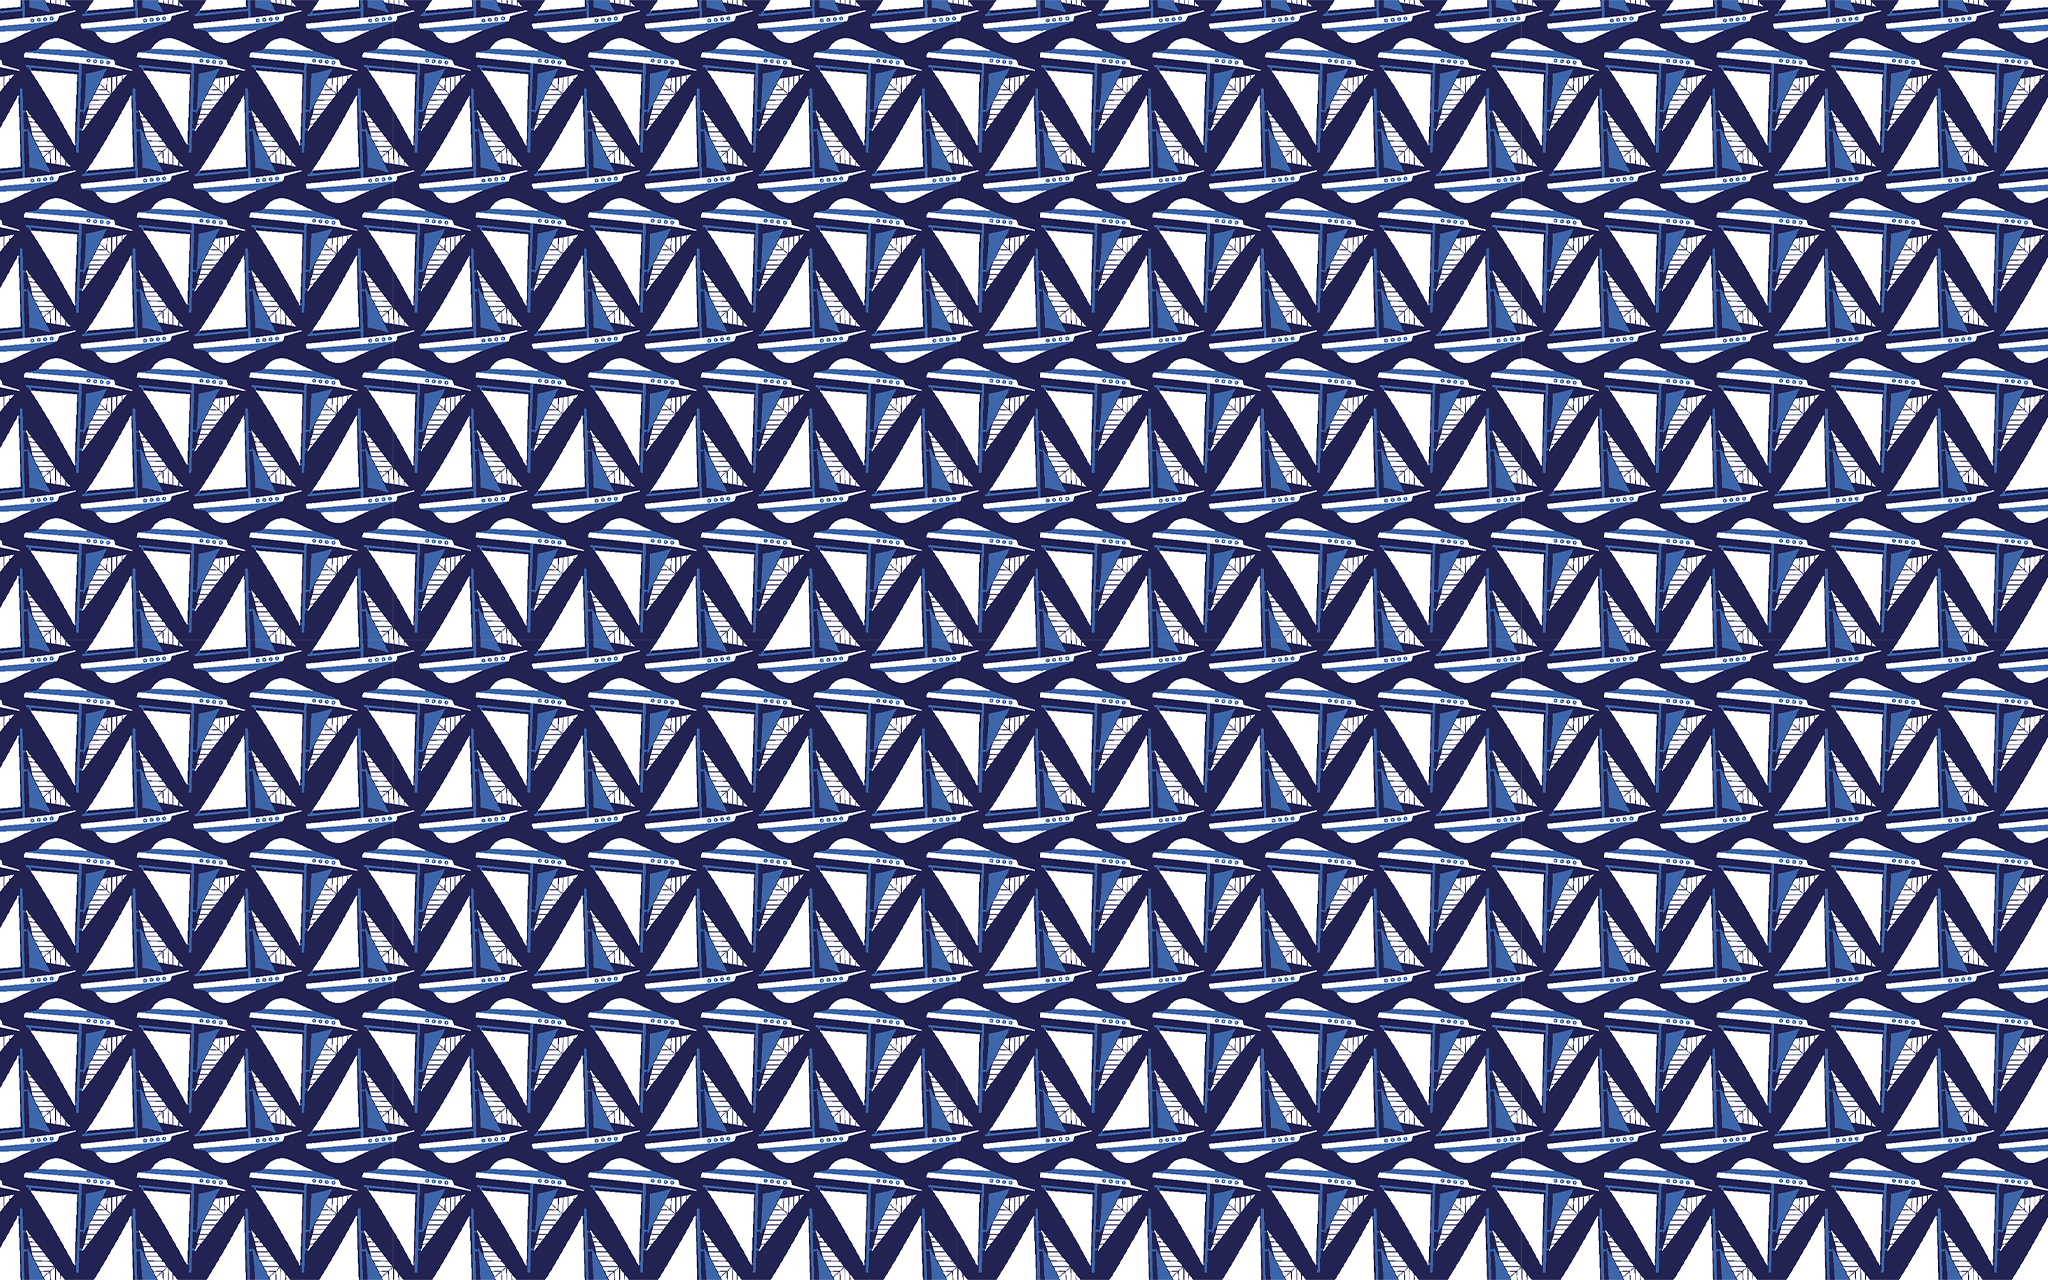 Geo Abstract Blue and White Pattern/Seamless